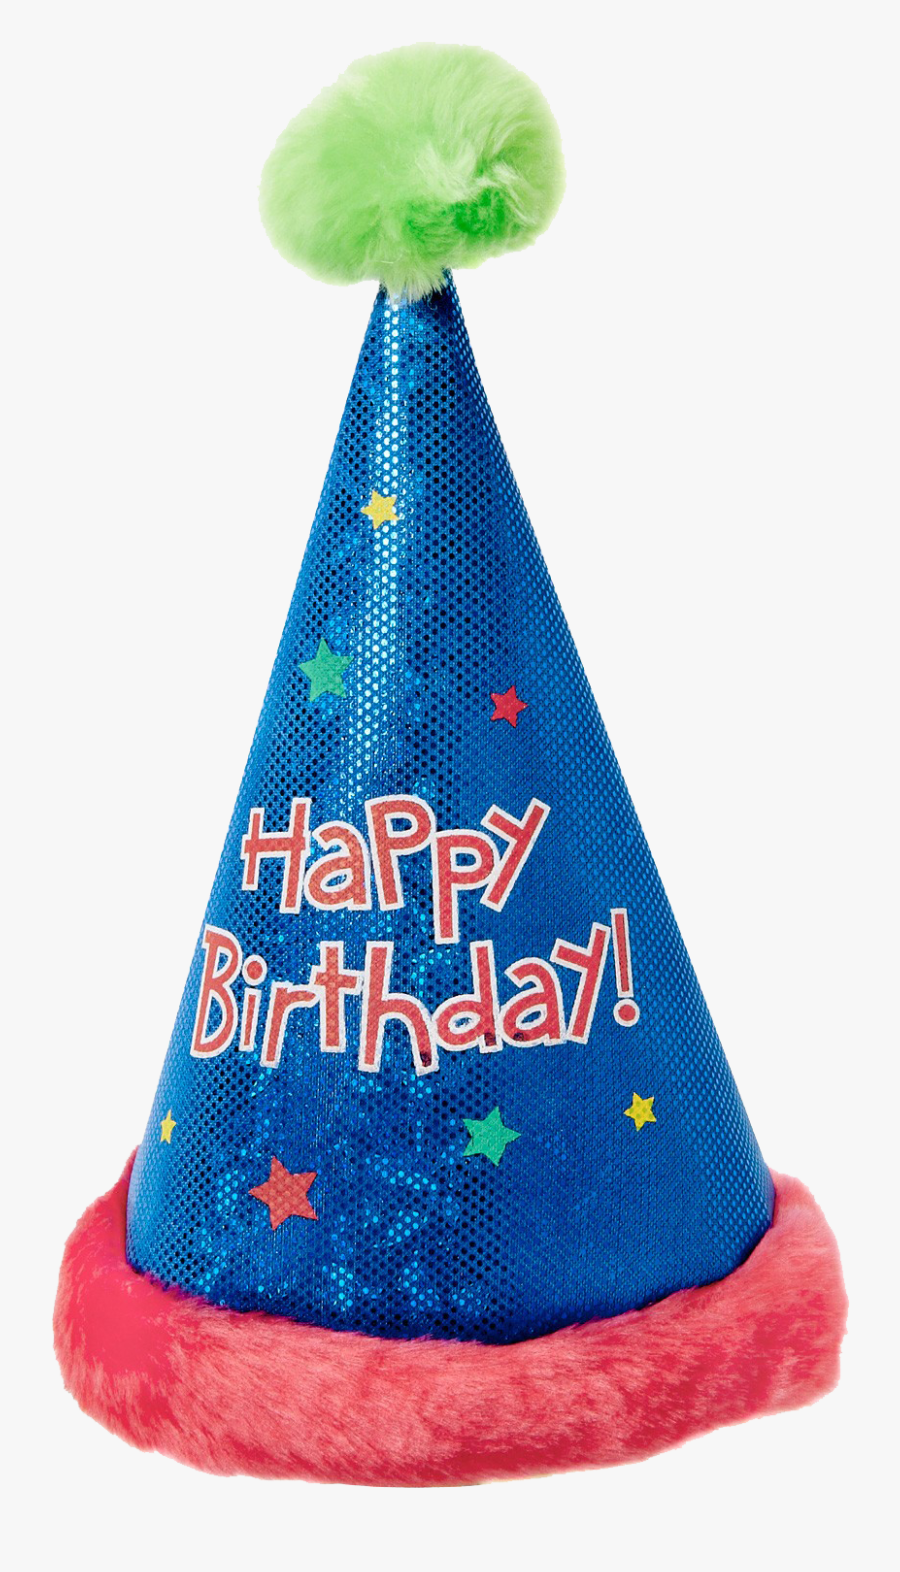 Hei! 24+ Grunner til Birthday Hat Png! To view the full png size